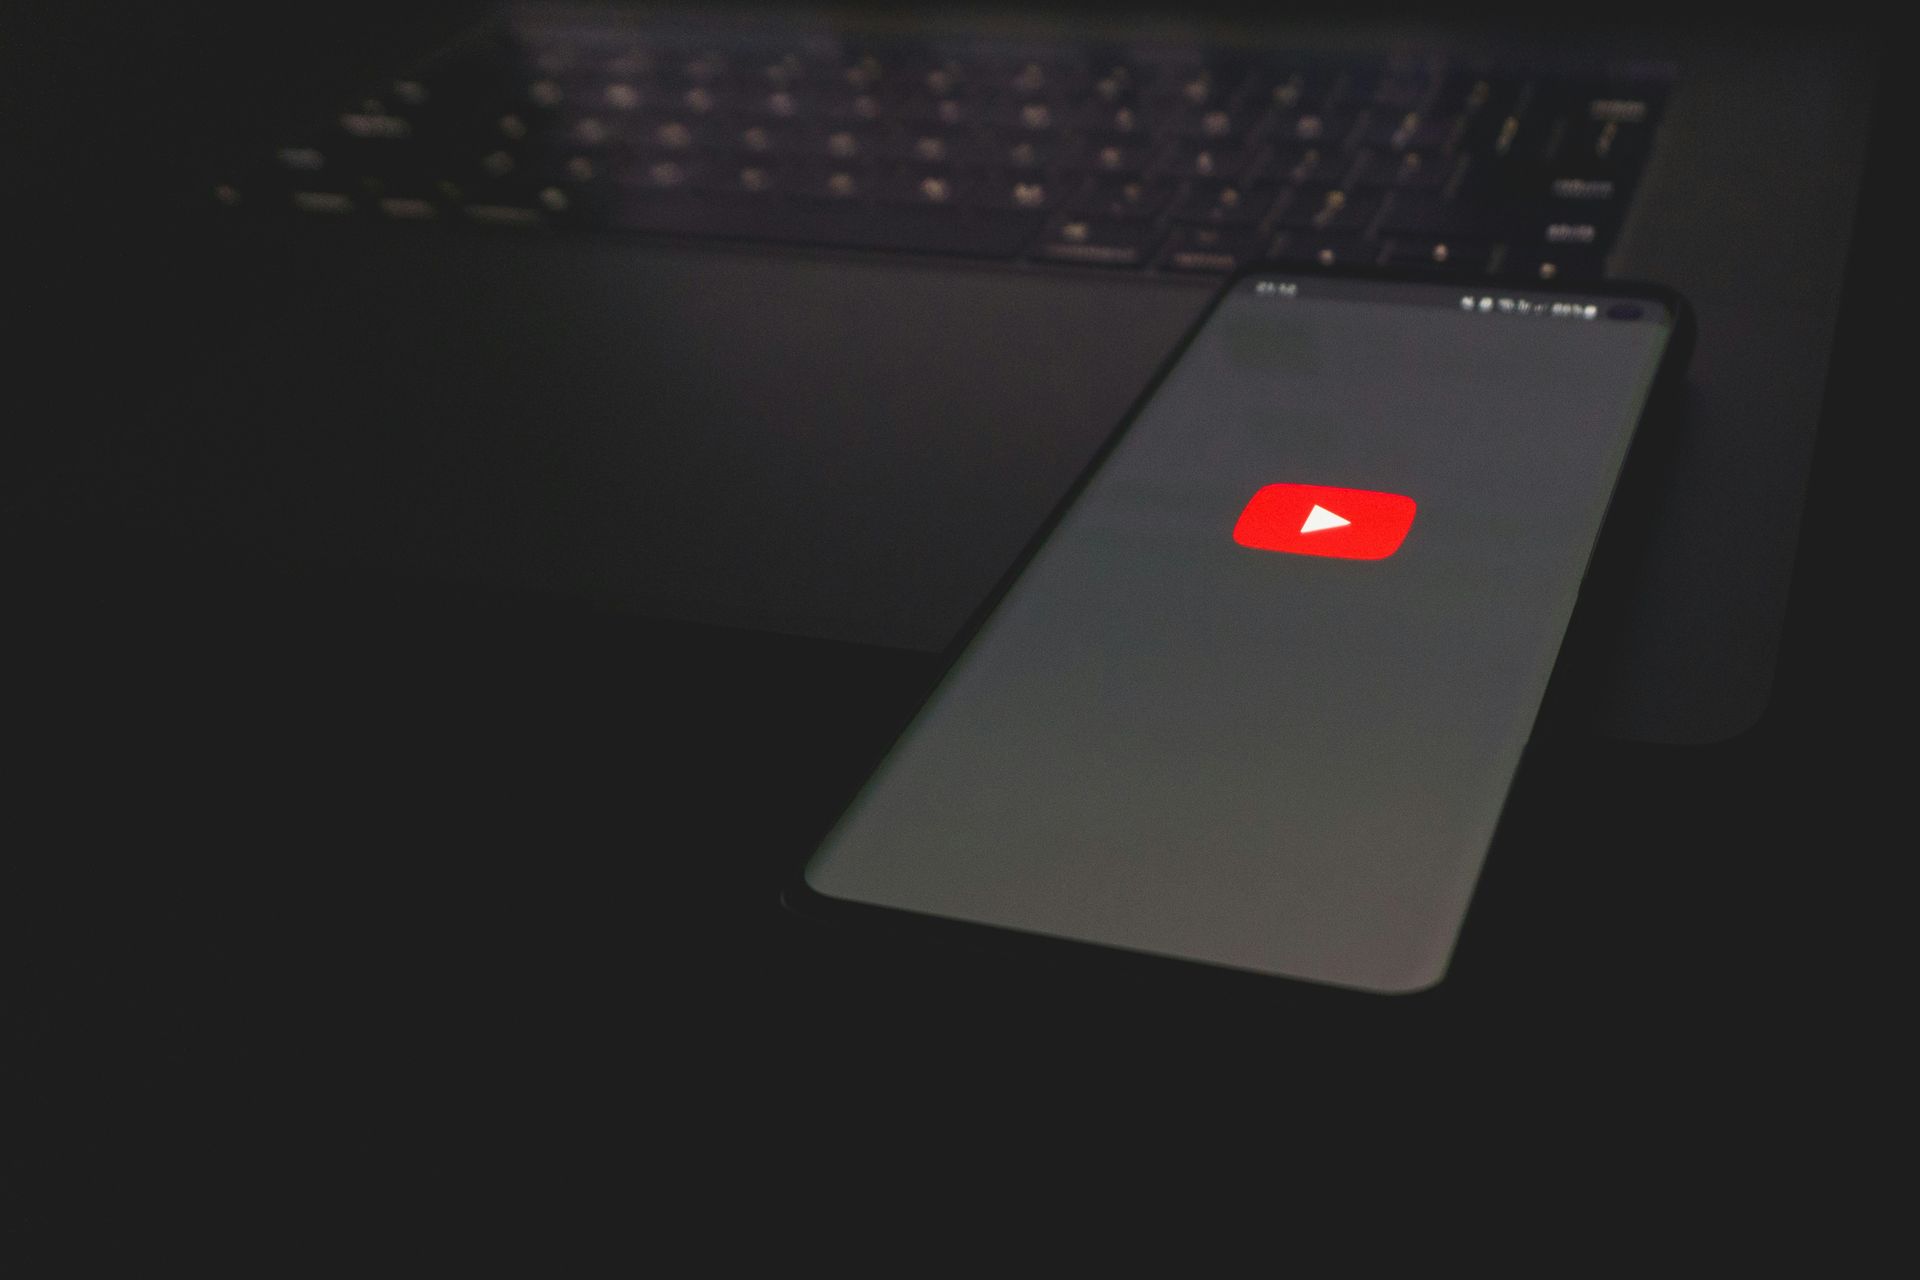 YouTube declares war on apps that violate its terms of service